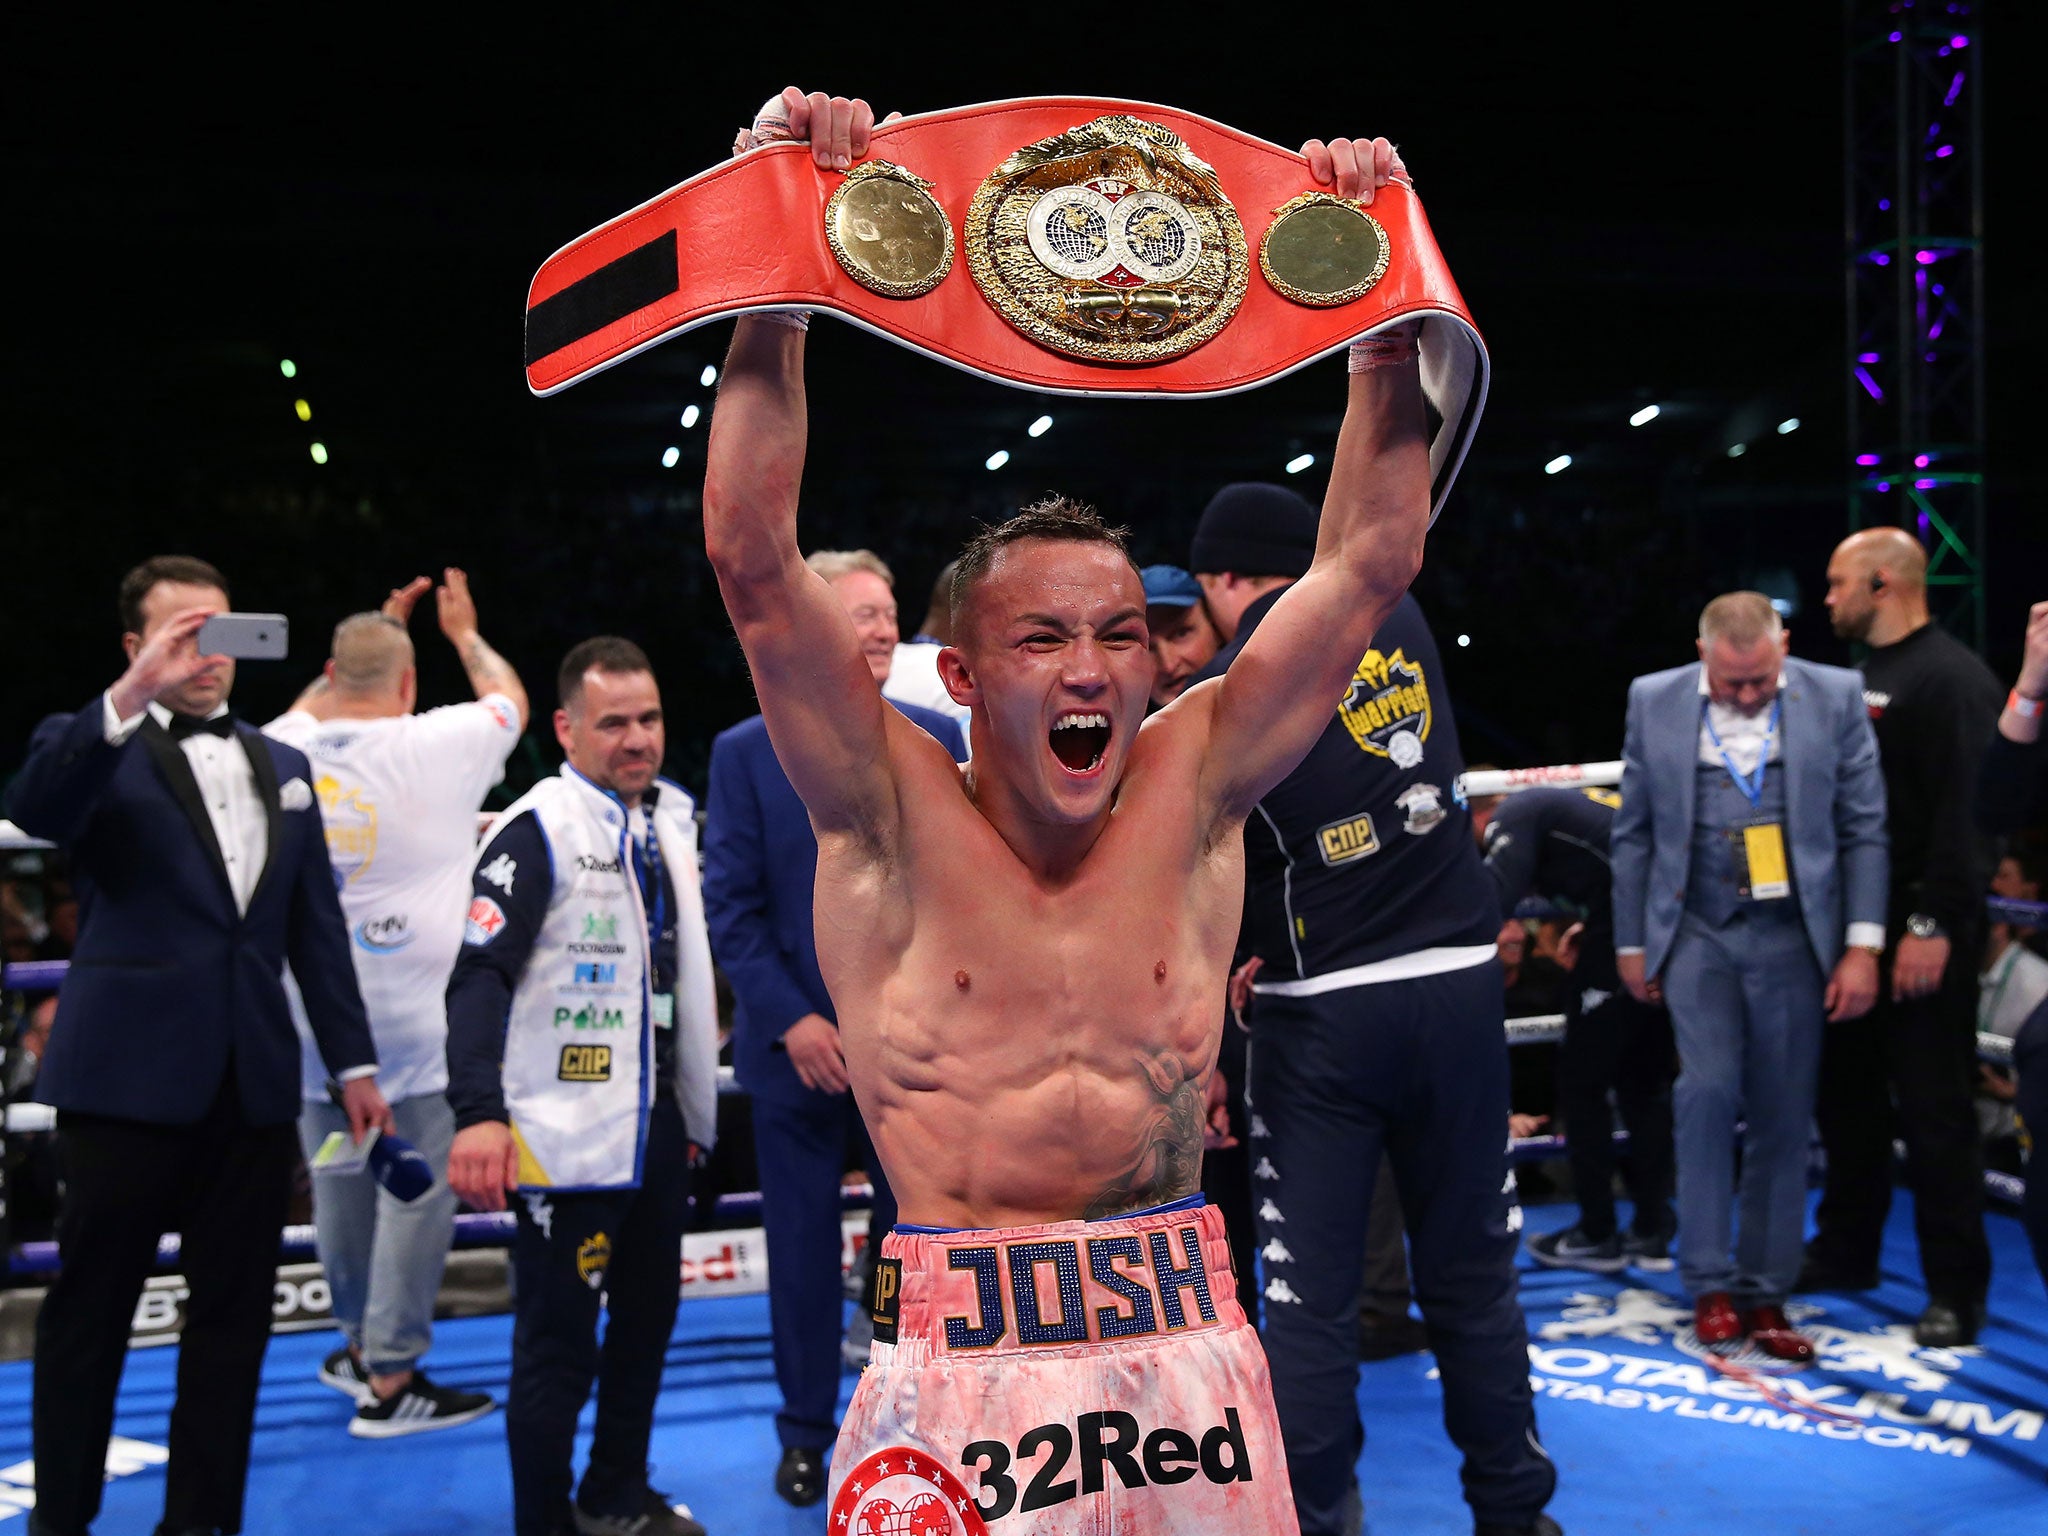 Warrington brought Selby's three-year reign as world champion to an end